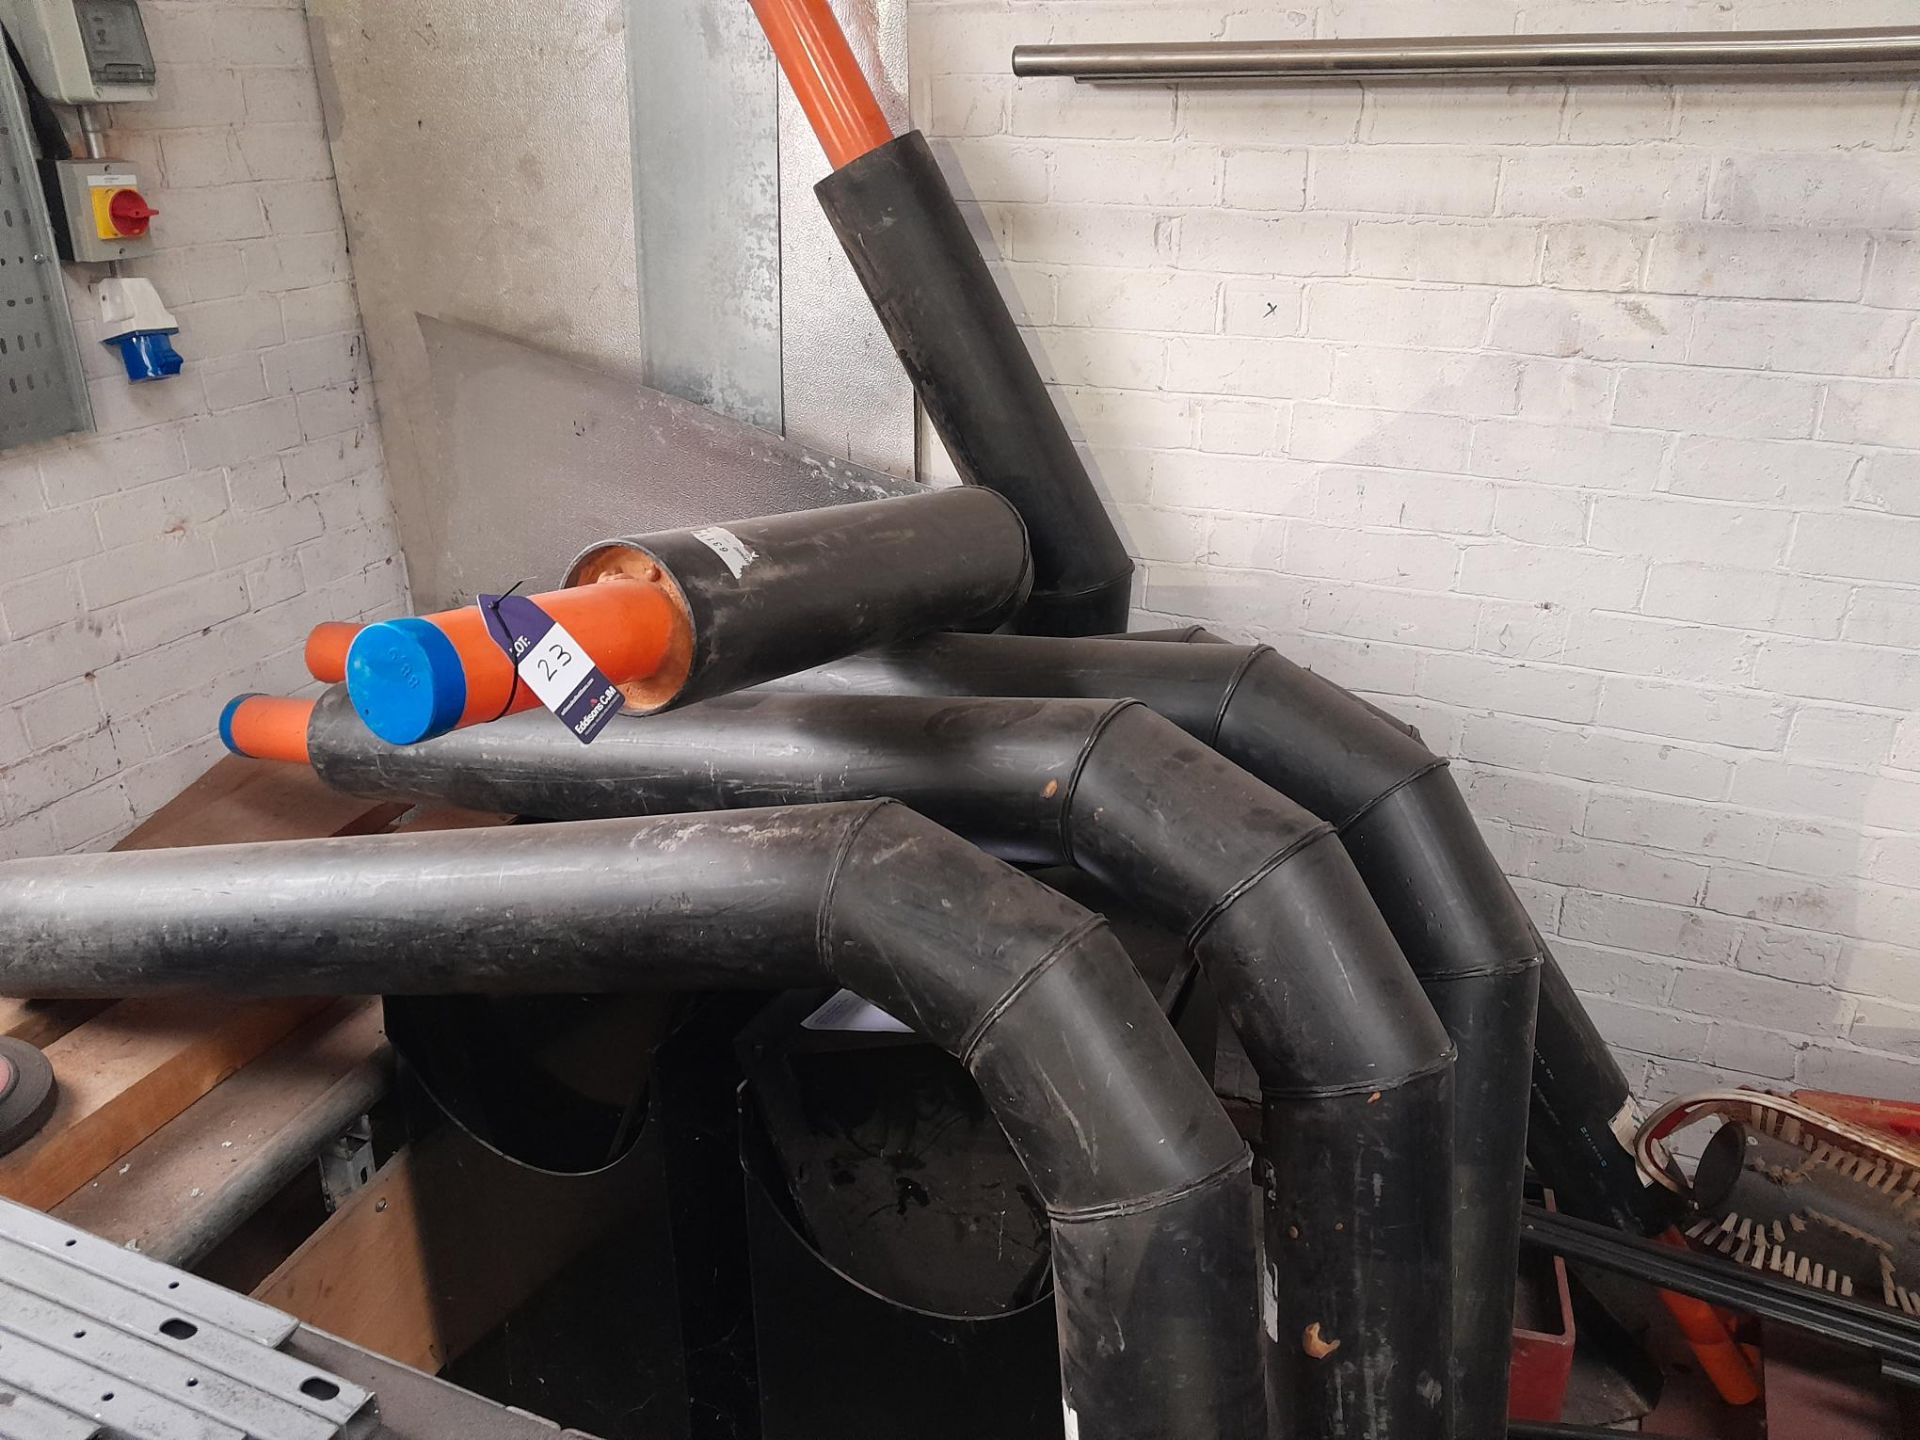 7 Unknown 1.1m x 1.6m 90° Pipework Lead-Ins - Image 2 of 2